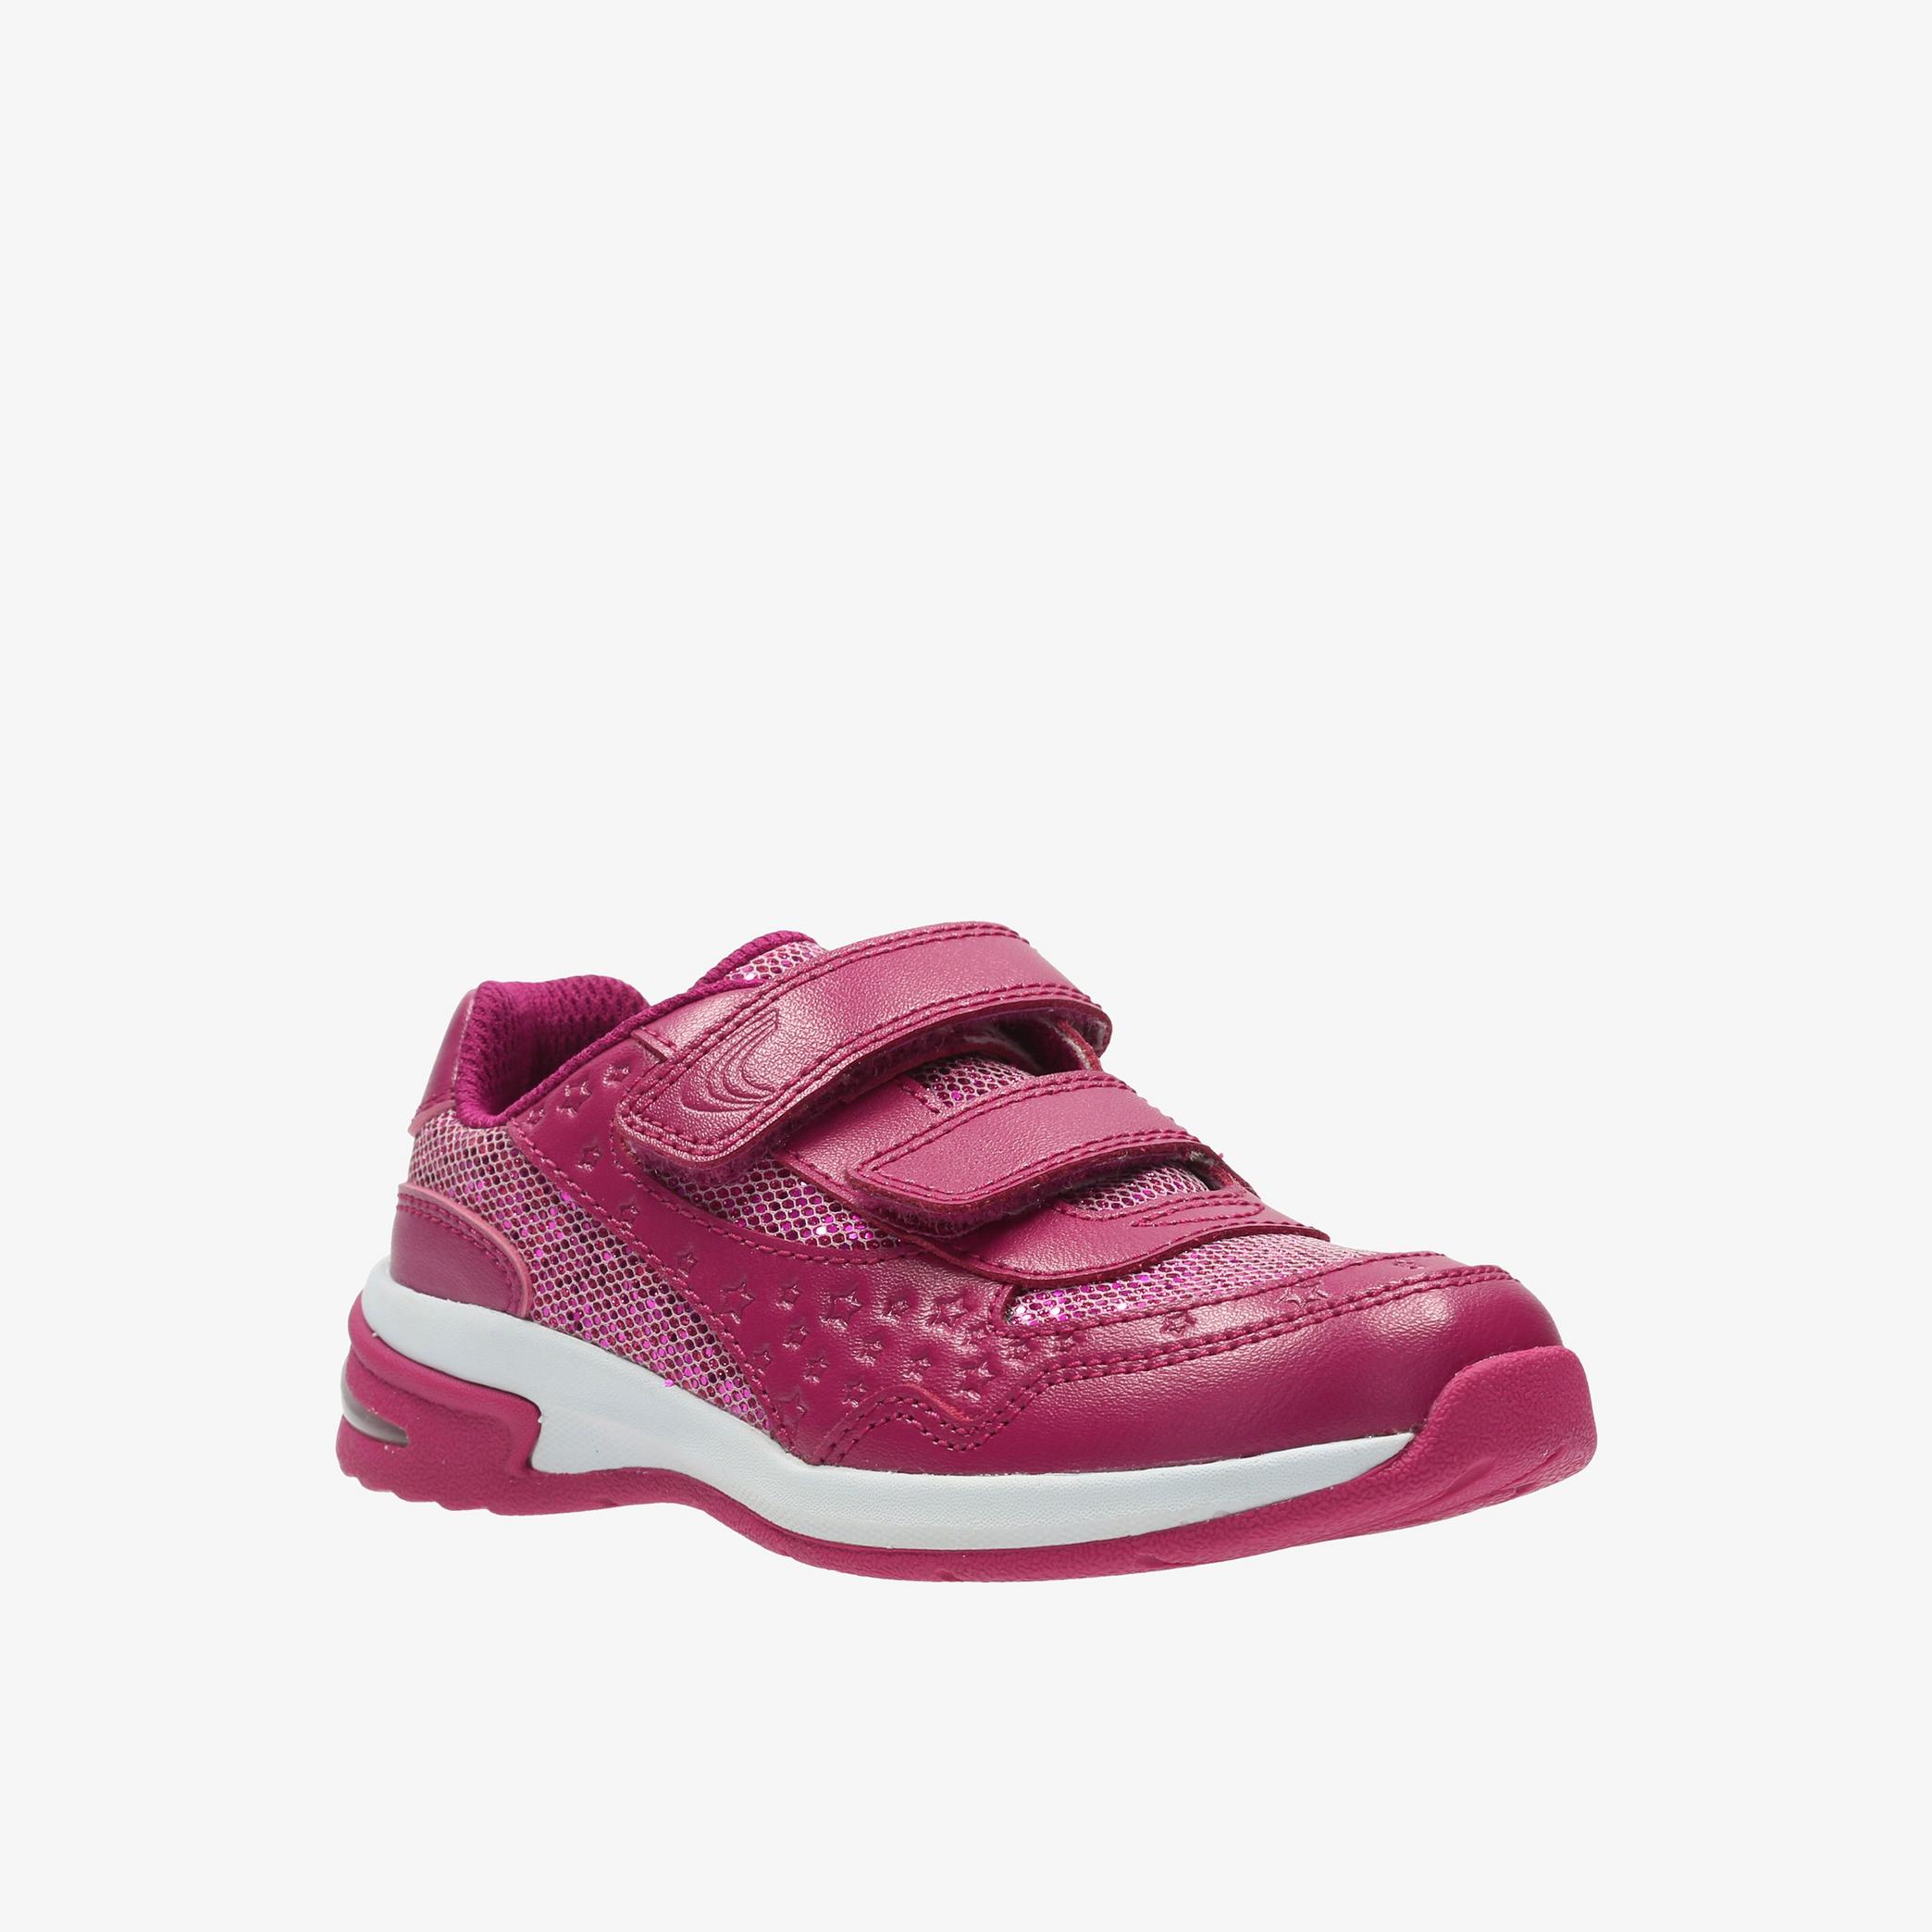 GIRLS Piper Play Kid Pink Trainers | Clarks Outlet